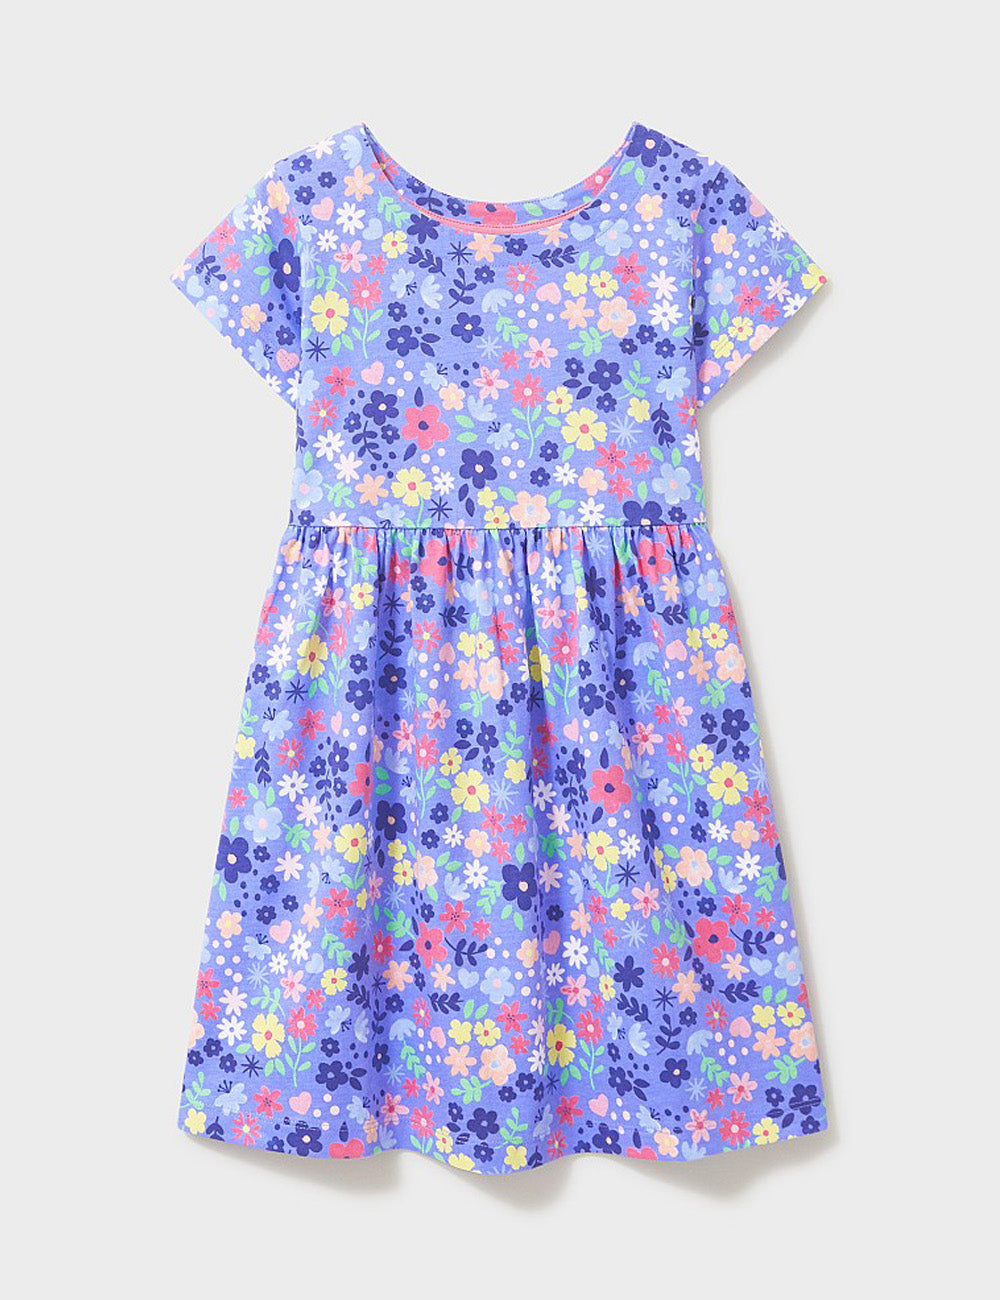 Crew Clothing Printed Floral Dress - Blue Multi